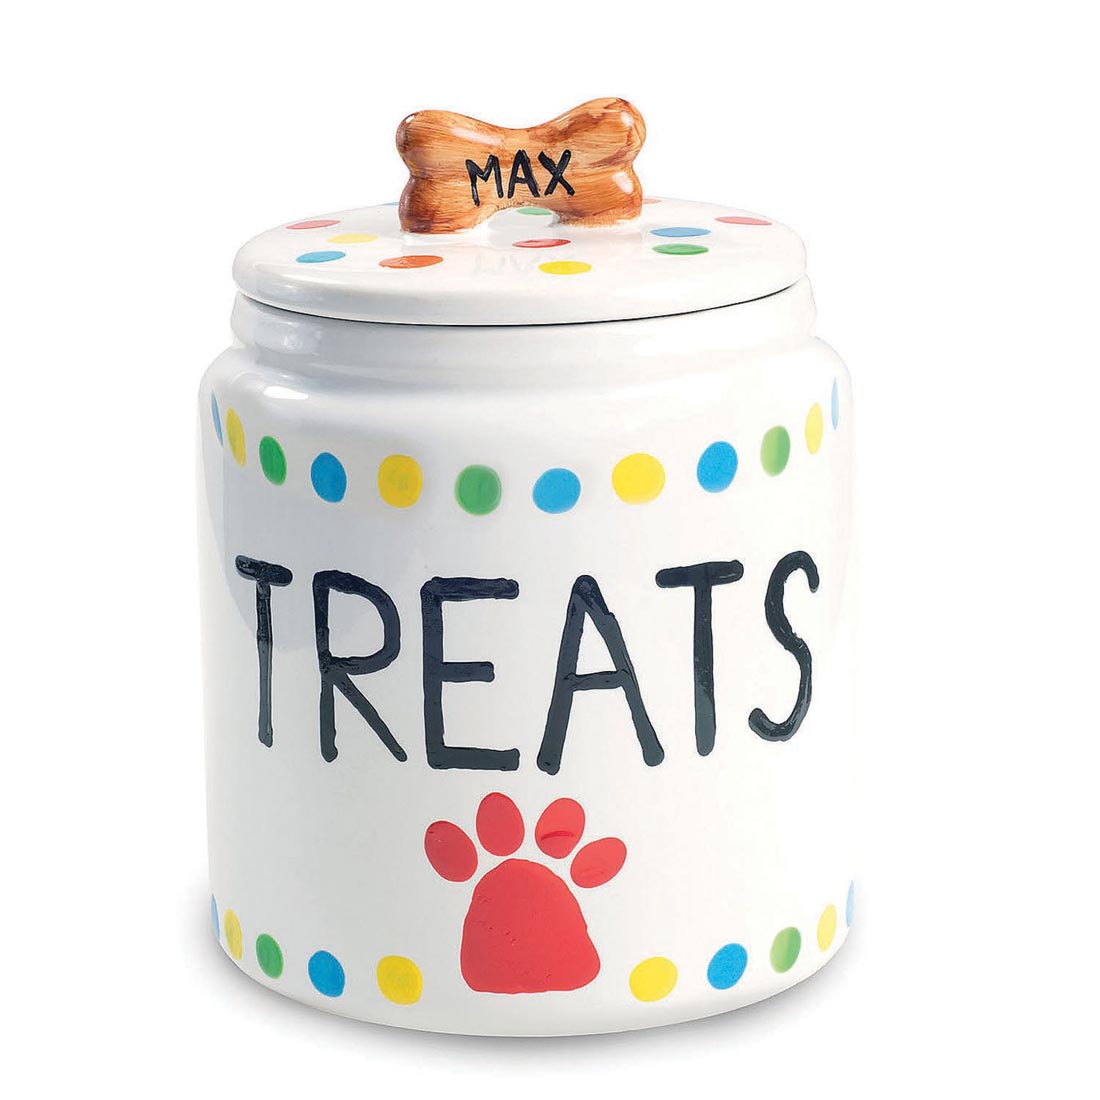 Completed project from the Paint Your Own Porcelain Dog Treat Jar Kit